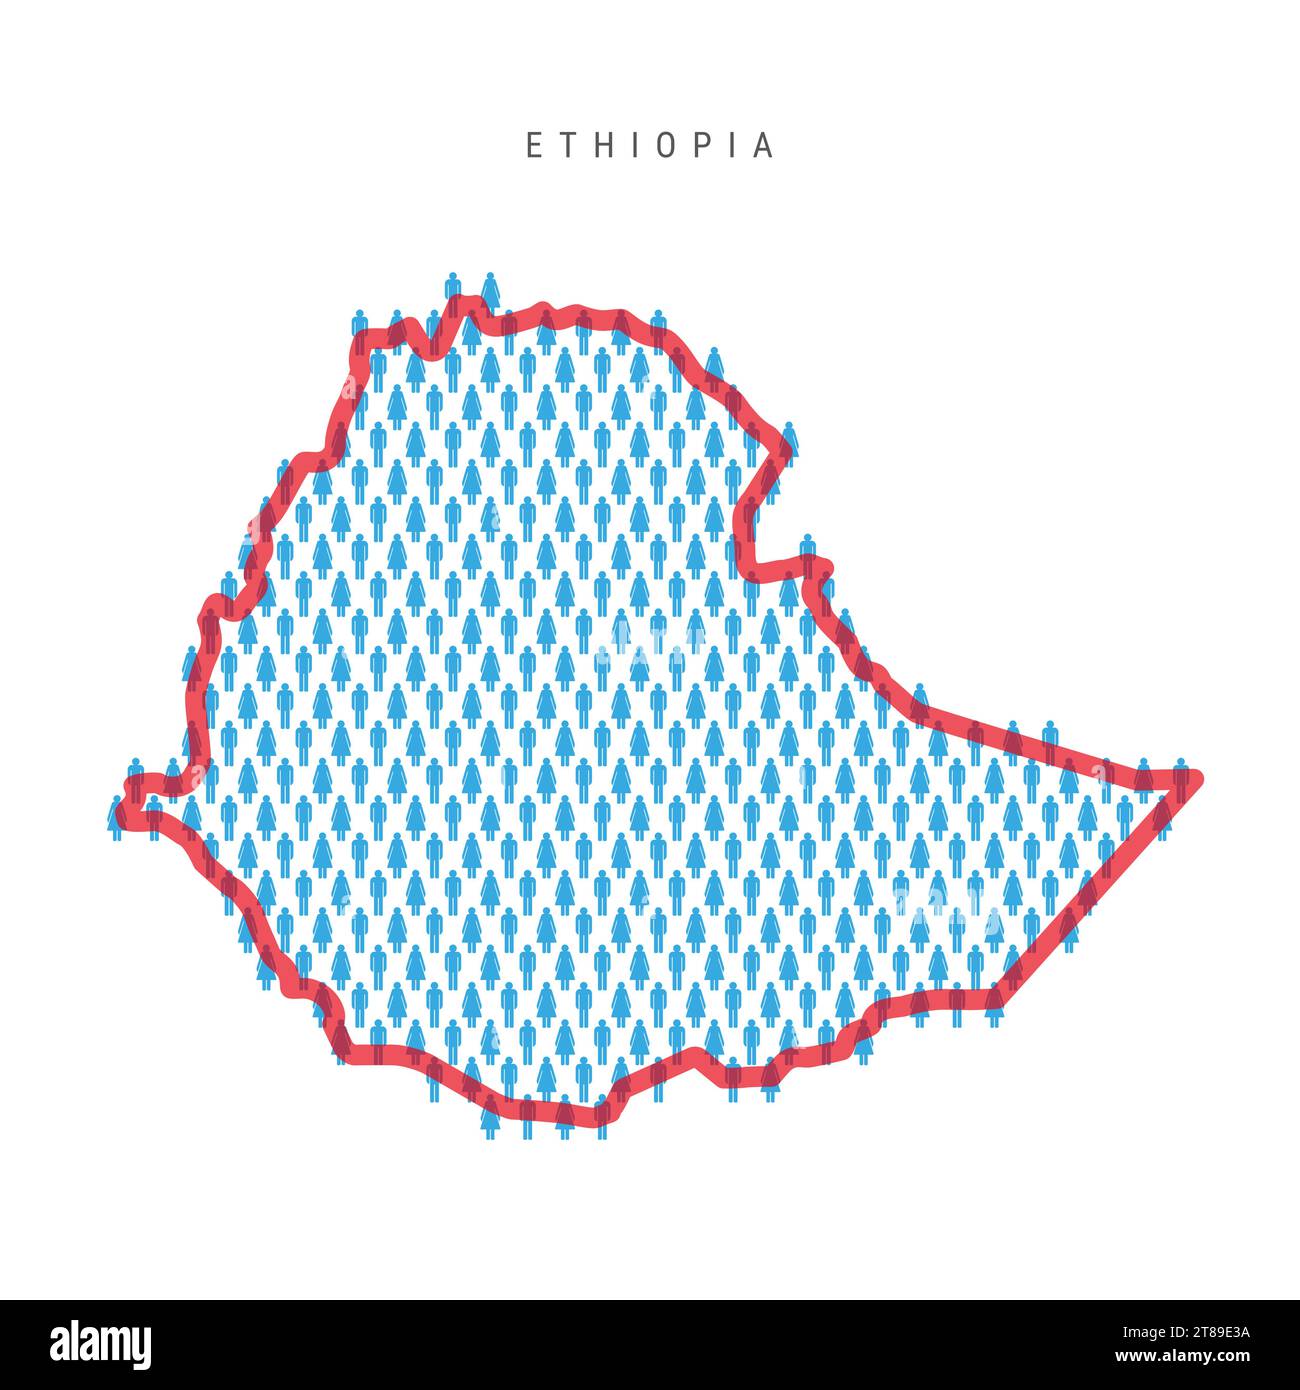 Ethiopia population map. Stick figures Ethiopian people map with bold red translucent country border. Pattern of men and women icons. Isolated vector Stock Vector